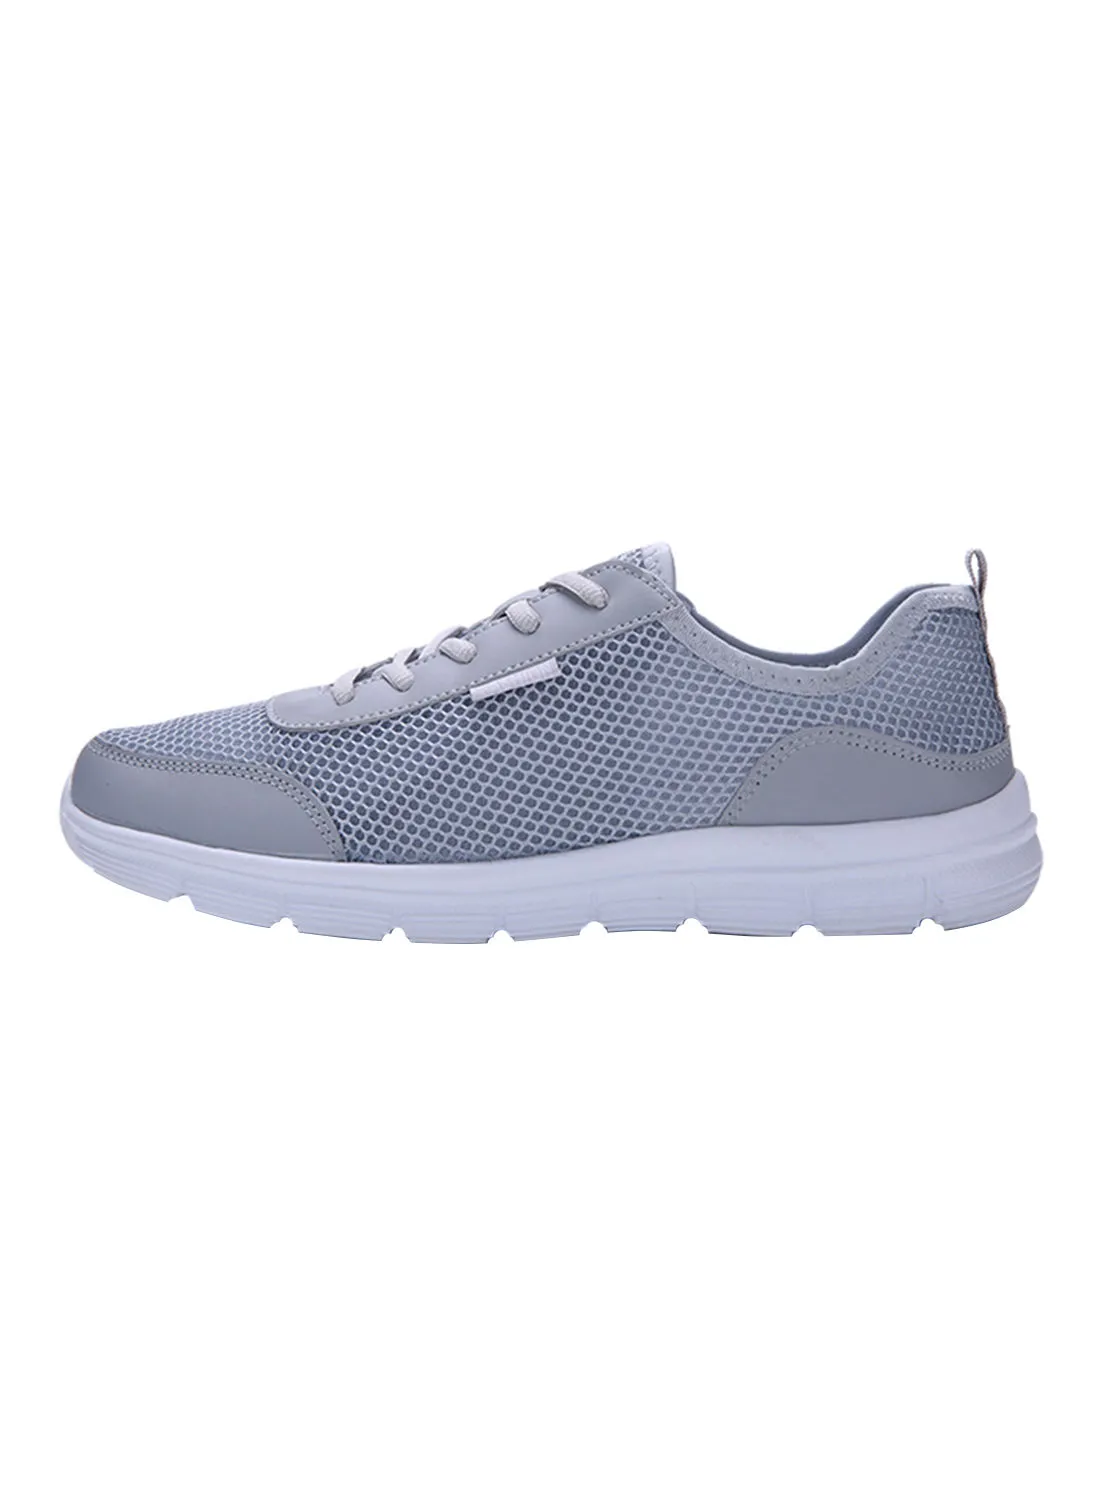 Generic Lace Up Trainers Grey